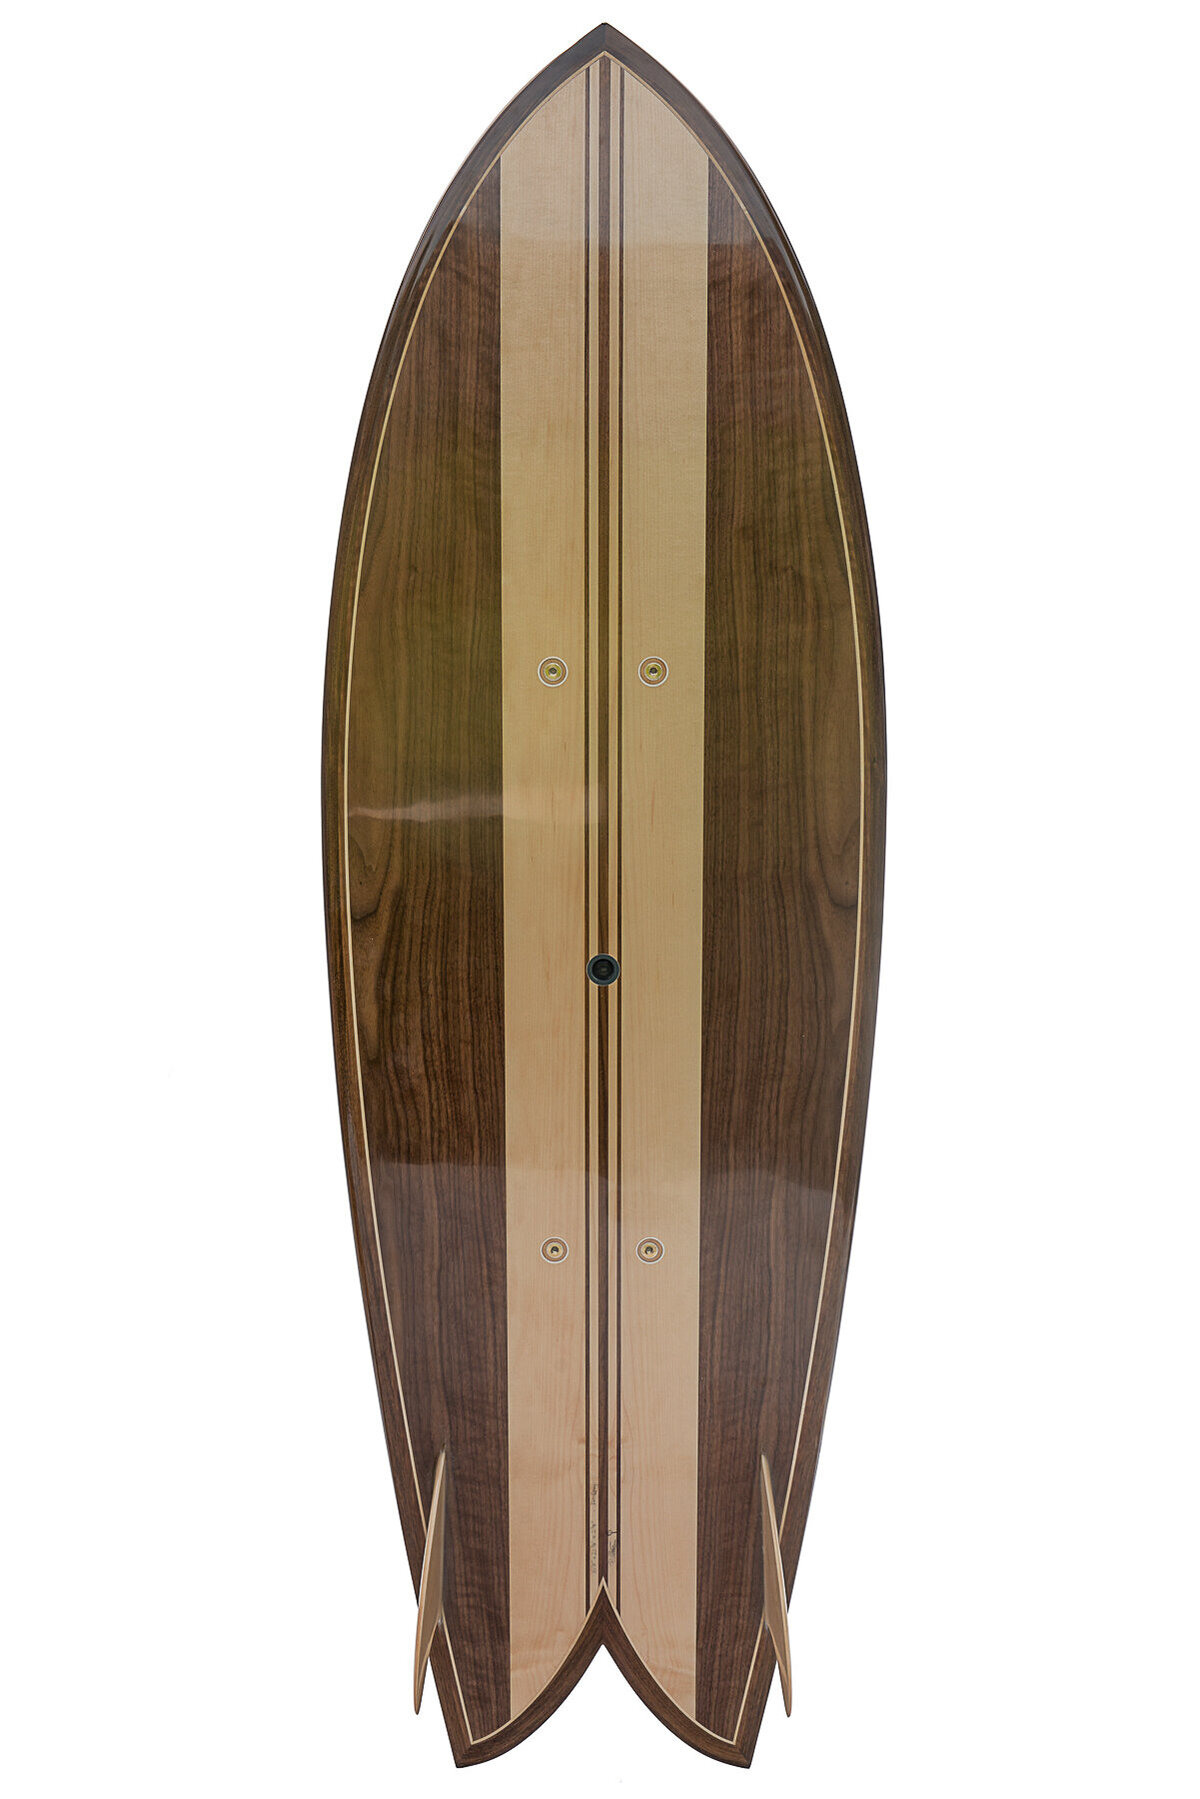 Red-Leaf-Sustainable-Surfboards-Gisborne-New-Zealand-Phil-Yeo-Photography-Videography-Commercial-5